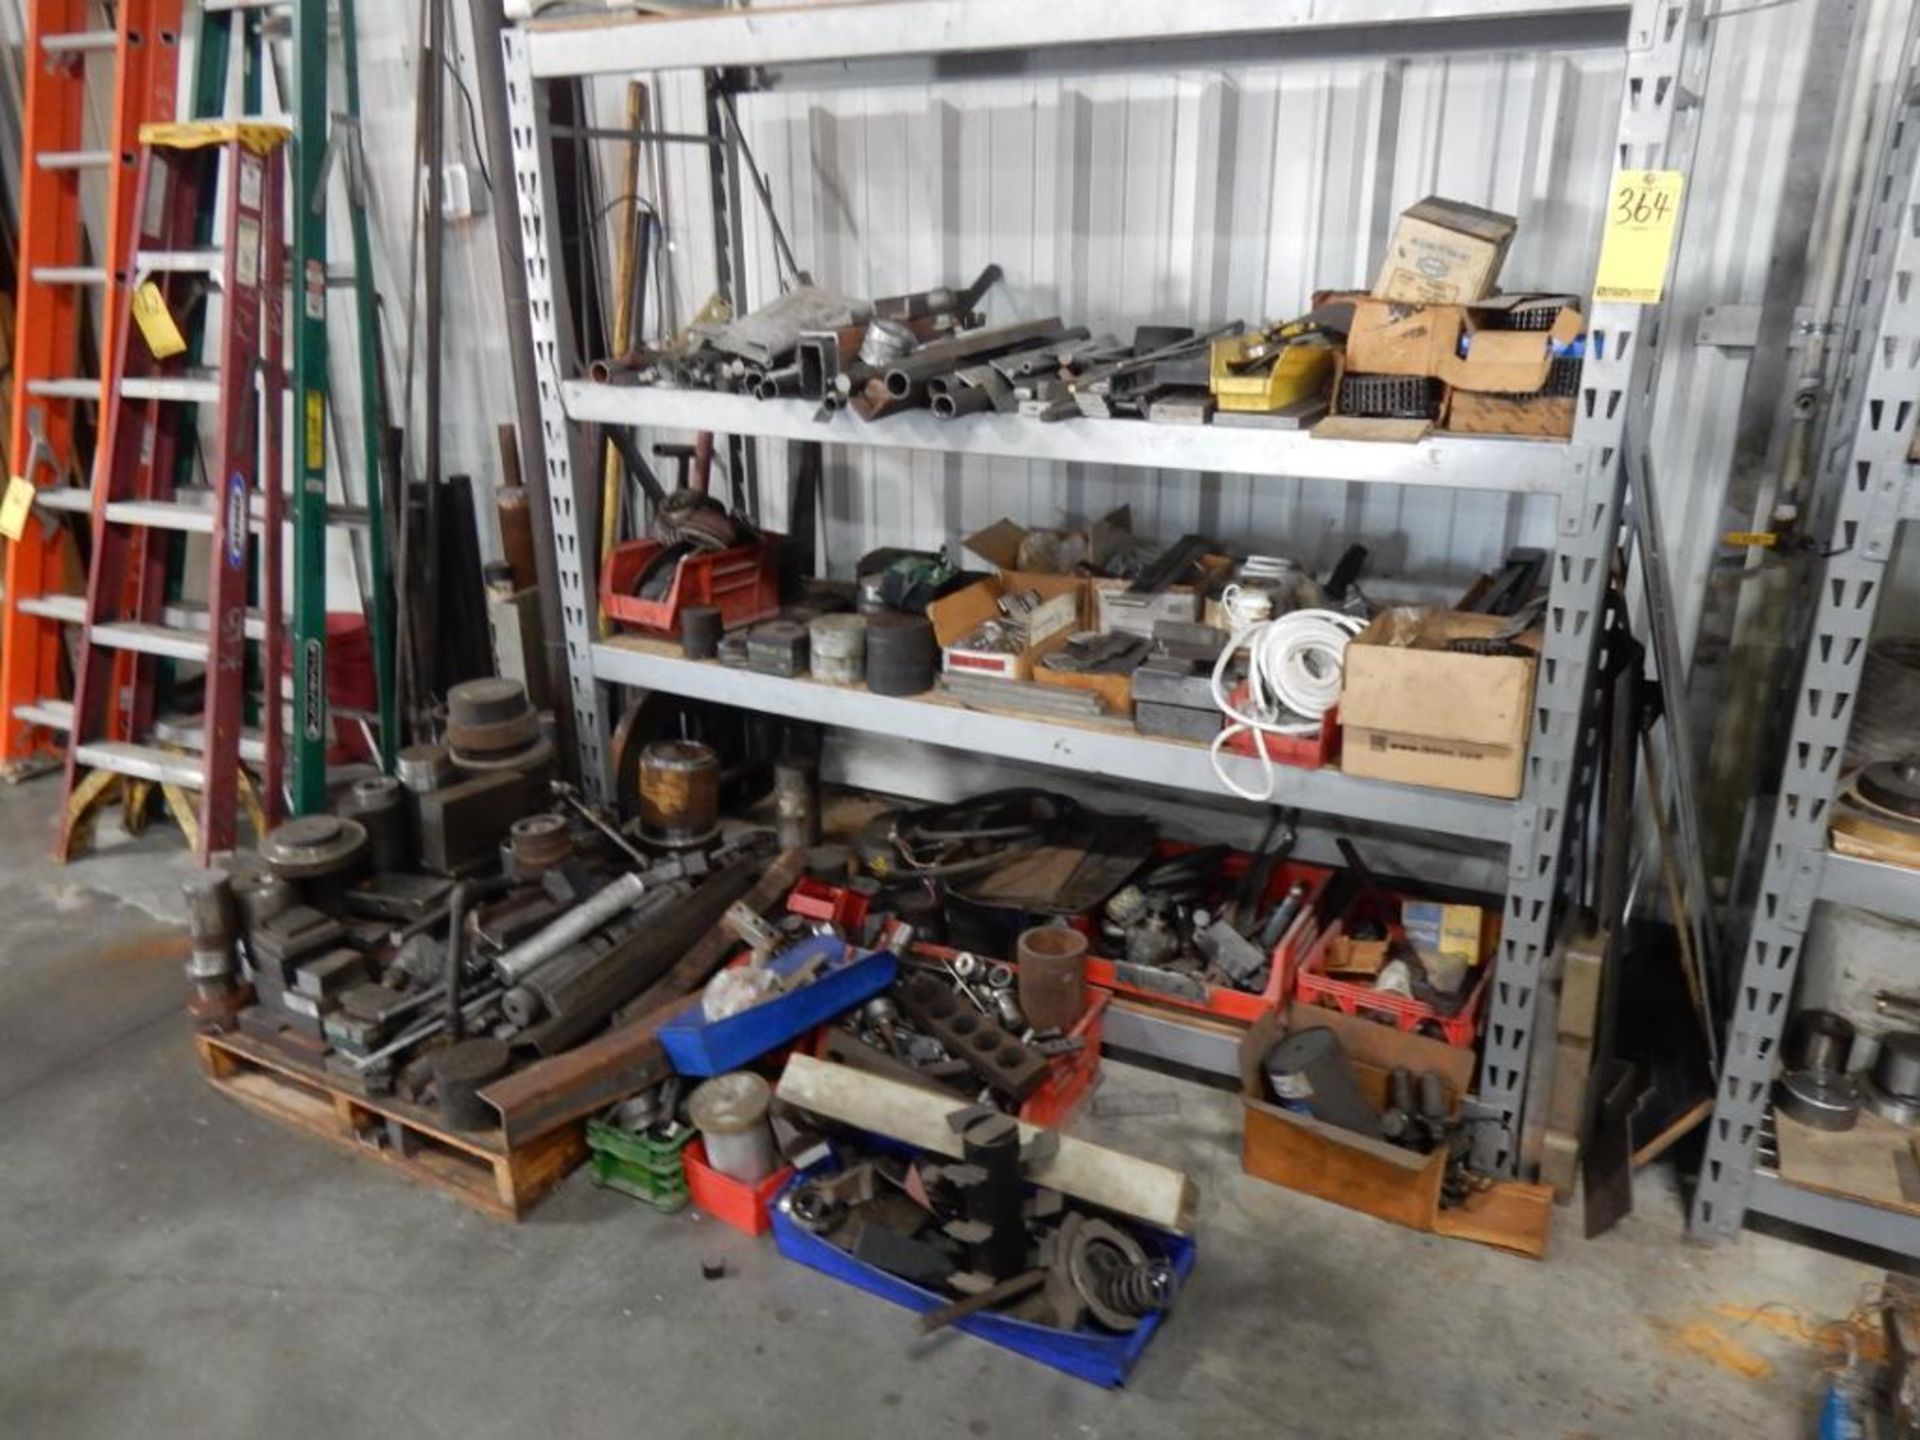 LOT (2) METAL SHELVES W/REMAINING CONTENTS - BARS, FITTINGS & (2) PALLETS ON FLOOR - Image 3 of 3